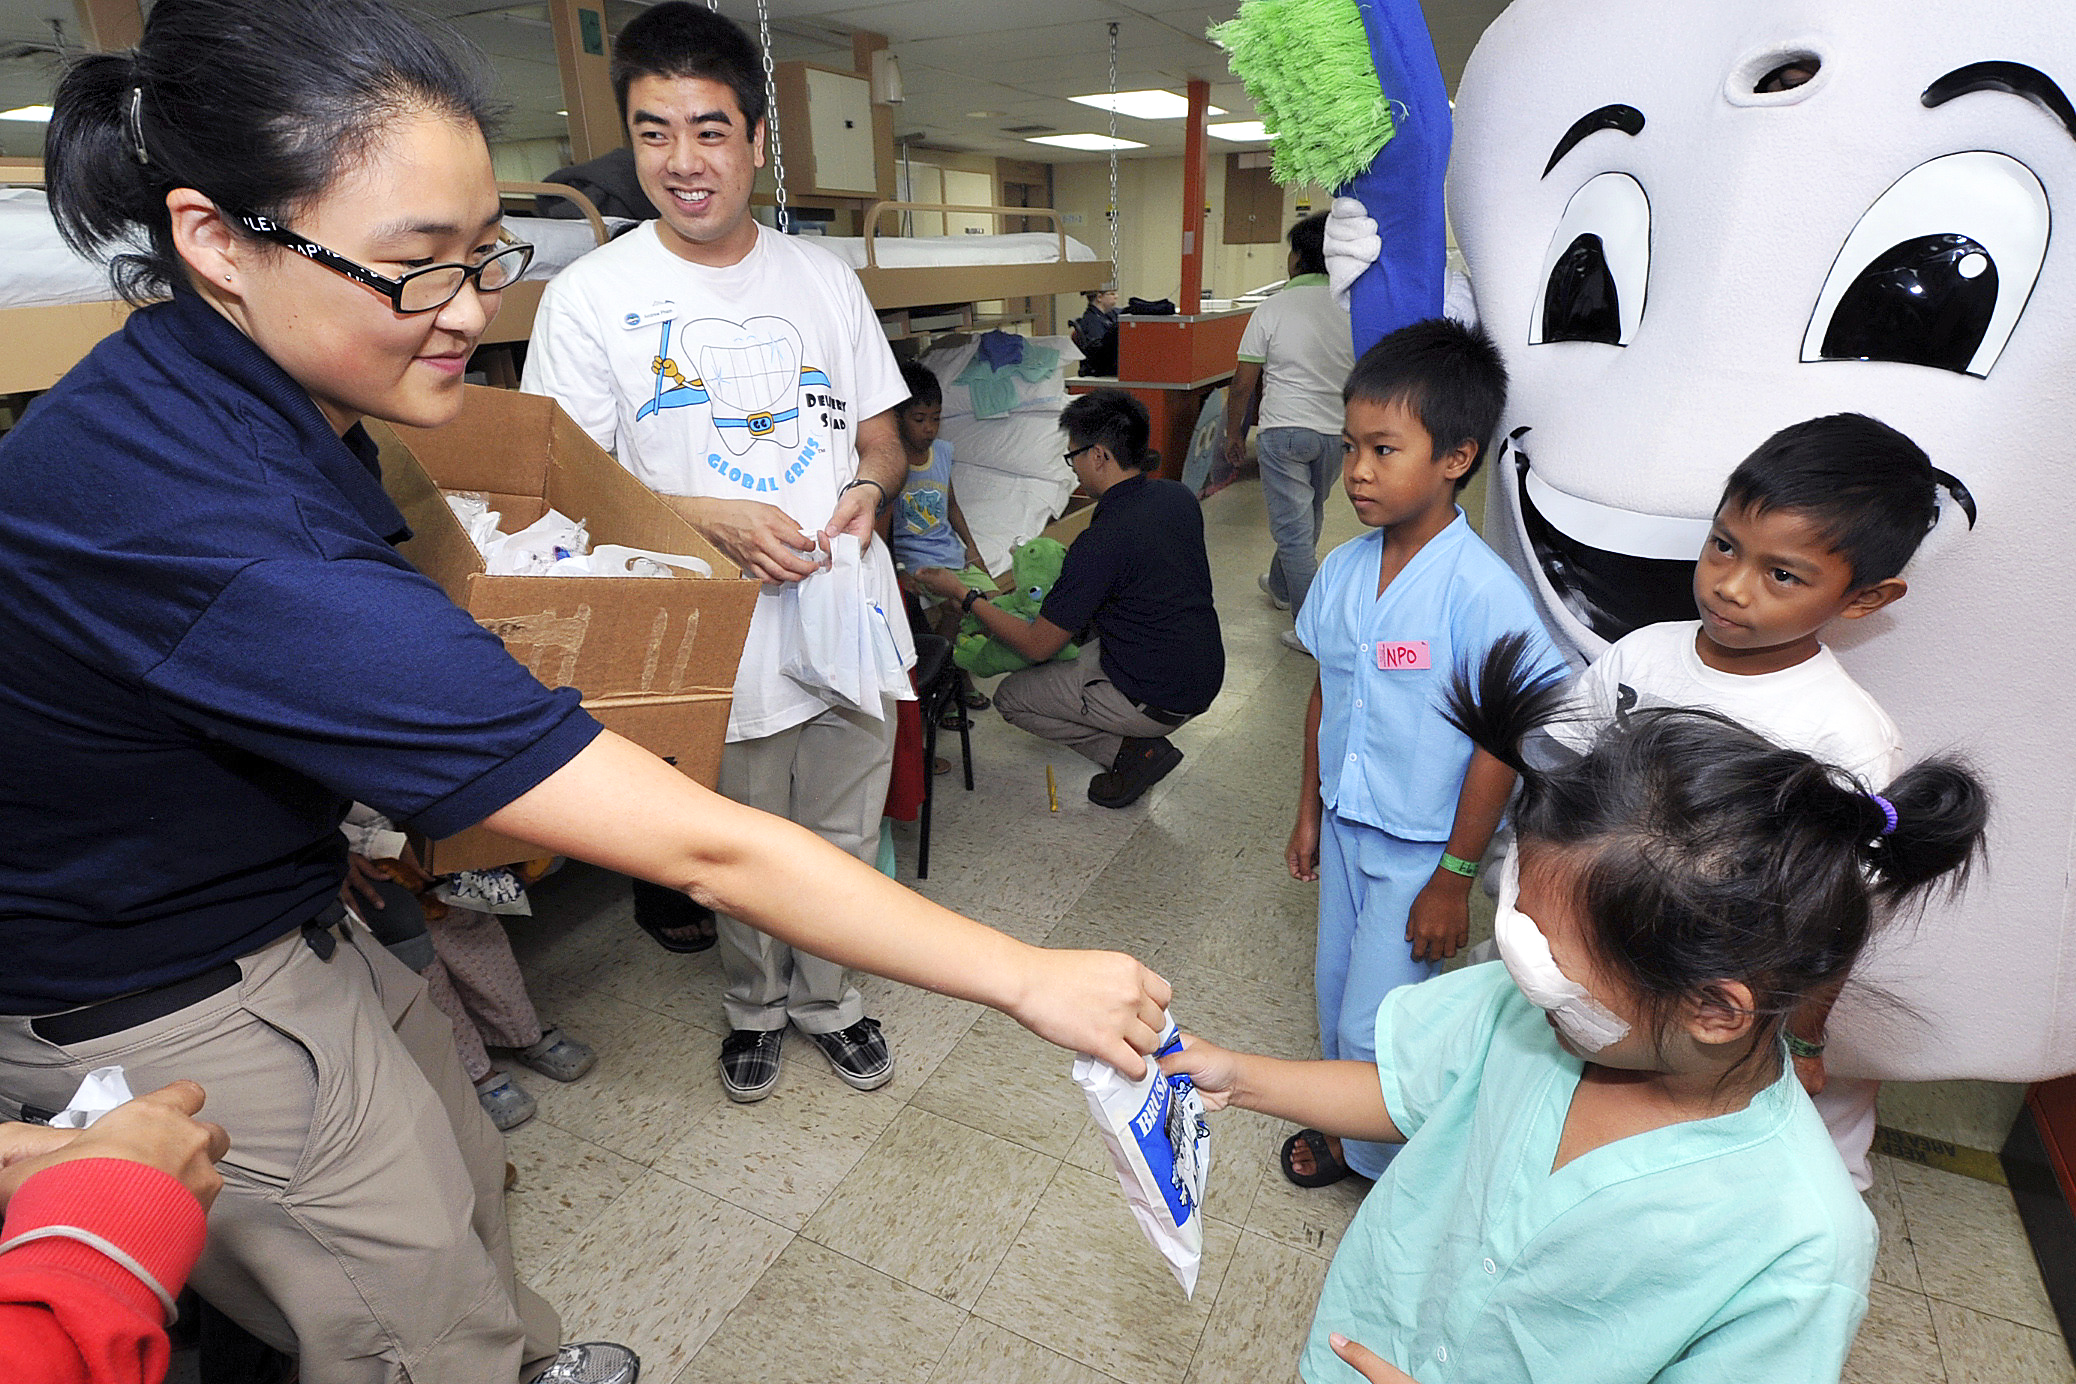 Eunice Lee, a volunteer, hands out dental care products to children in the  pediatrics ward aboard